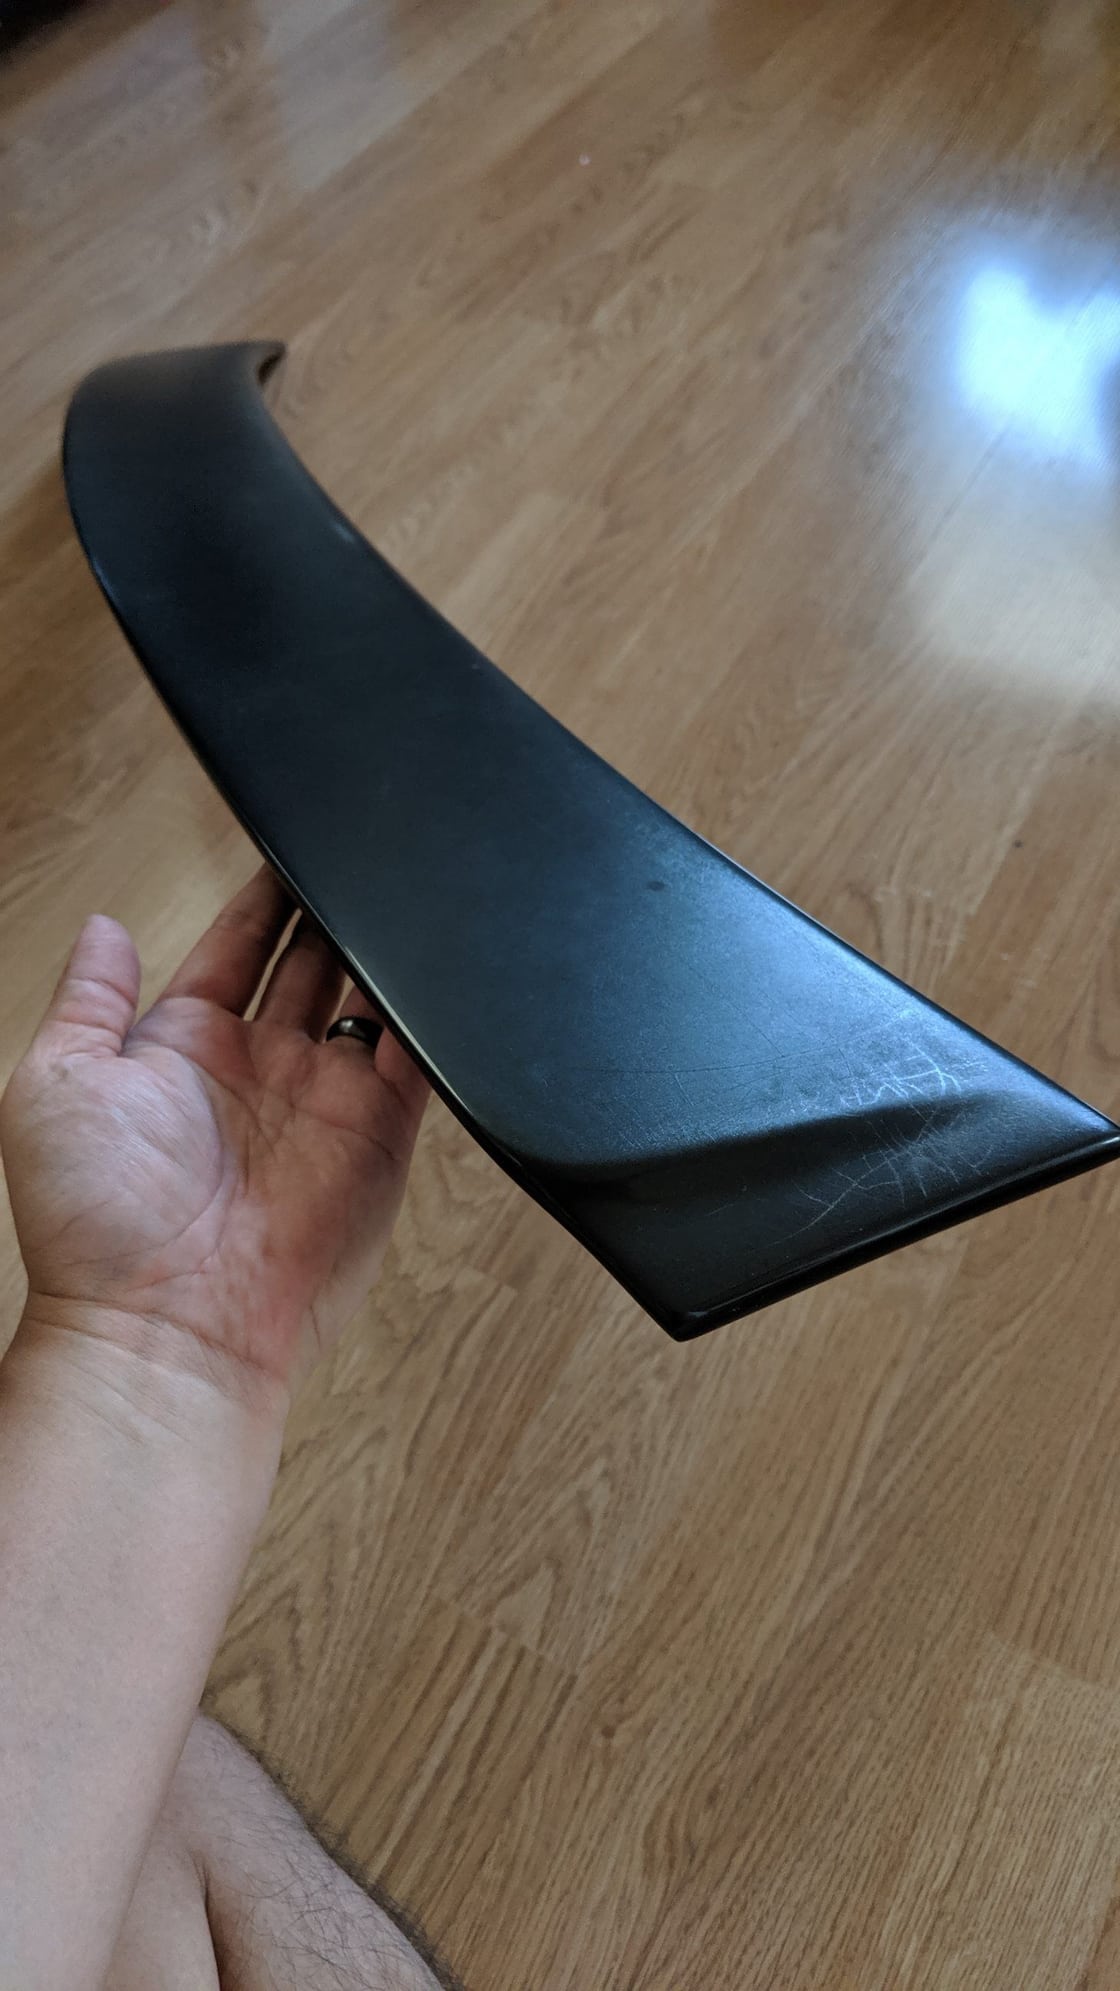 Exterior Body Parts - FS: IS250/350/ISF Roof spoiler $20 - Used - 2006 to 2013 Lexus IS250 - 2006 to 2013 Lexus IS350 - 2008 to 2014 Lexus IS F - San Jose, CA 95131, United States